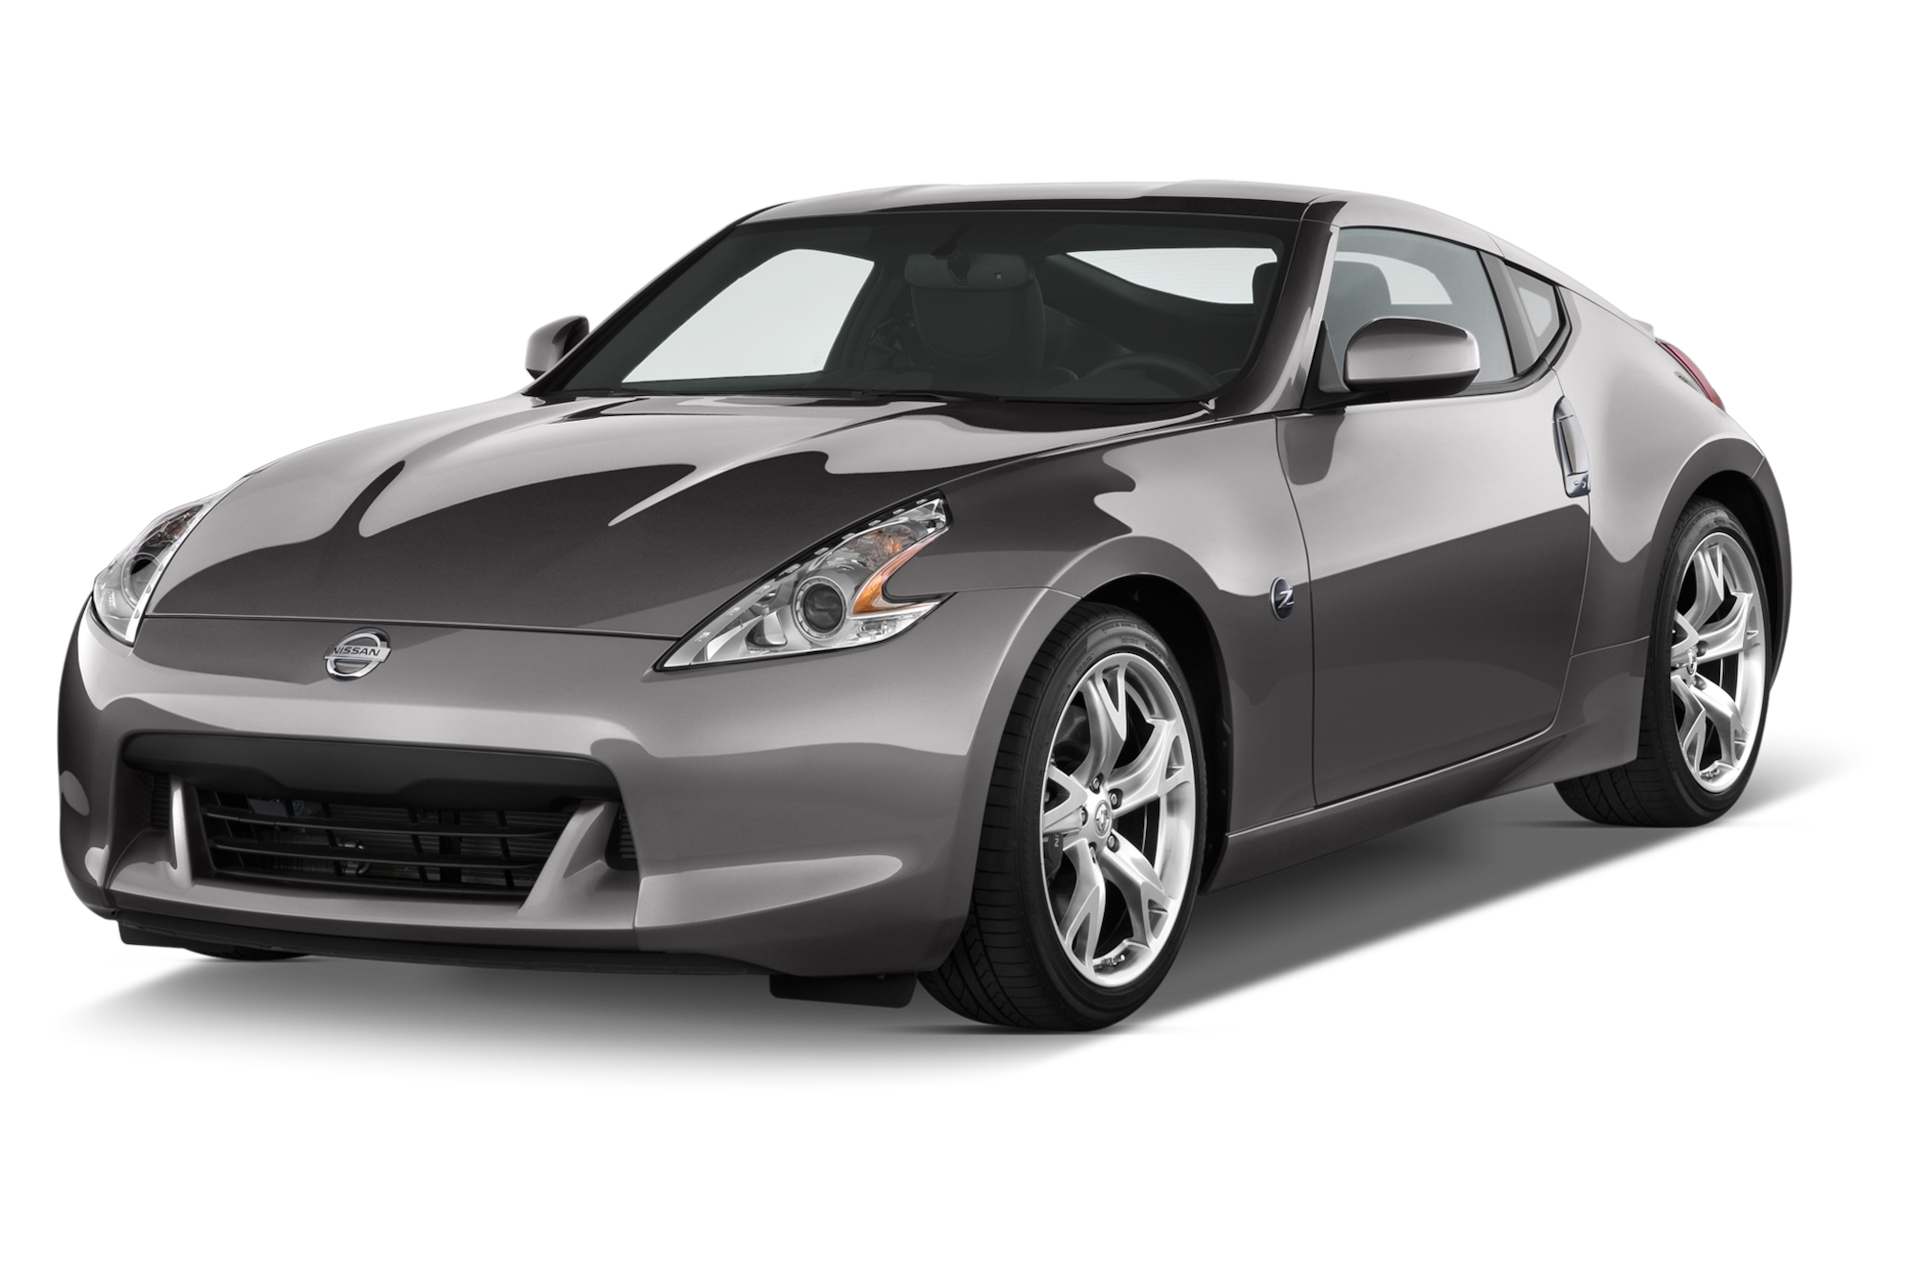 2010 Nissan 370Z Prices, Reviews, and Photos - MotorTrend